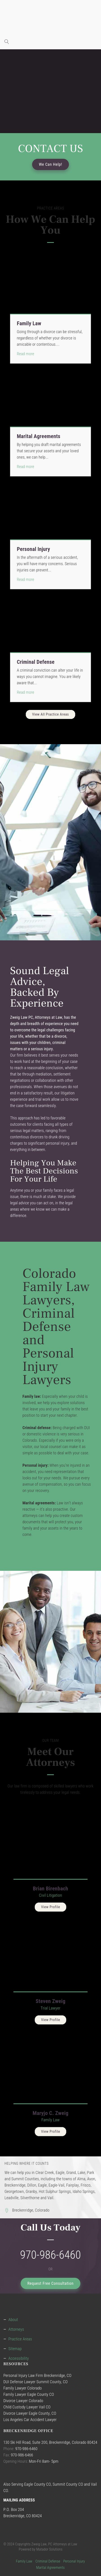 Cheroutes Zweig, PC Attorneys at Law - Breckenridge CO Lawyers